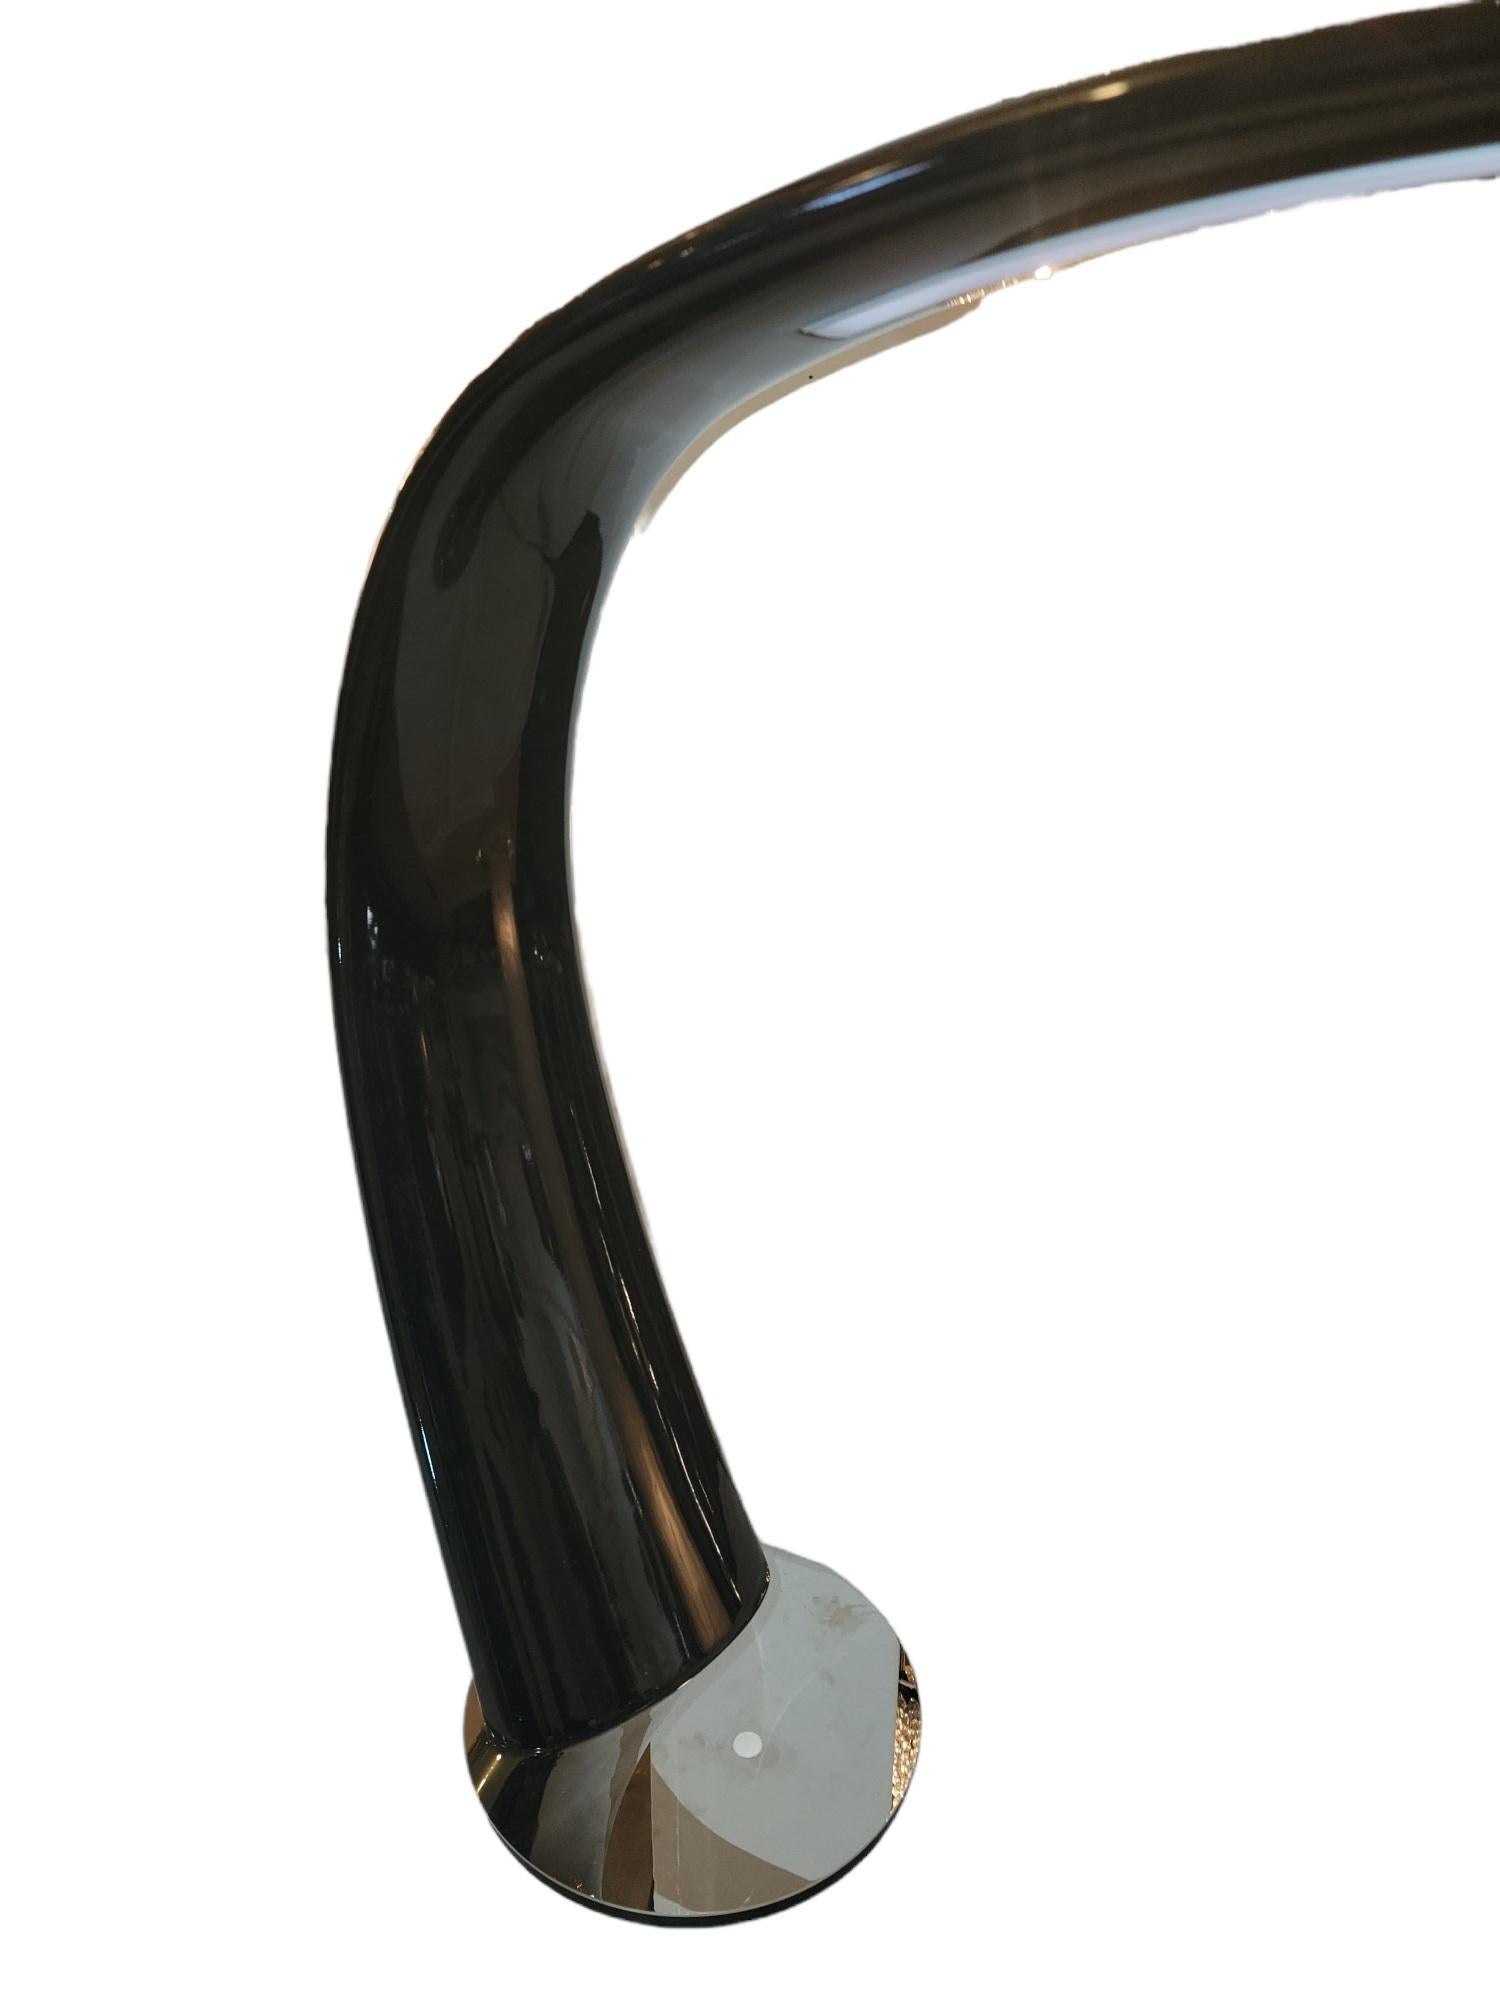 North American Italian Cattelan Lacquered Arm Table Lamp For Sale